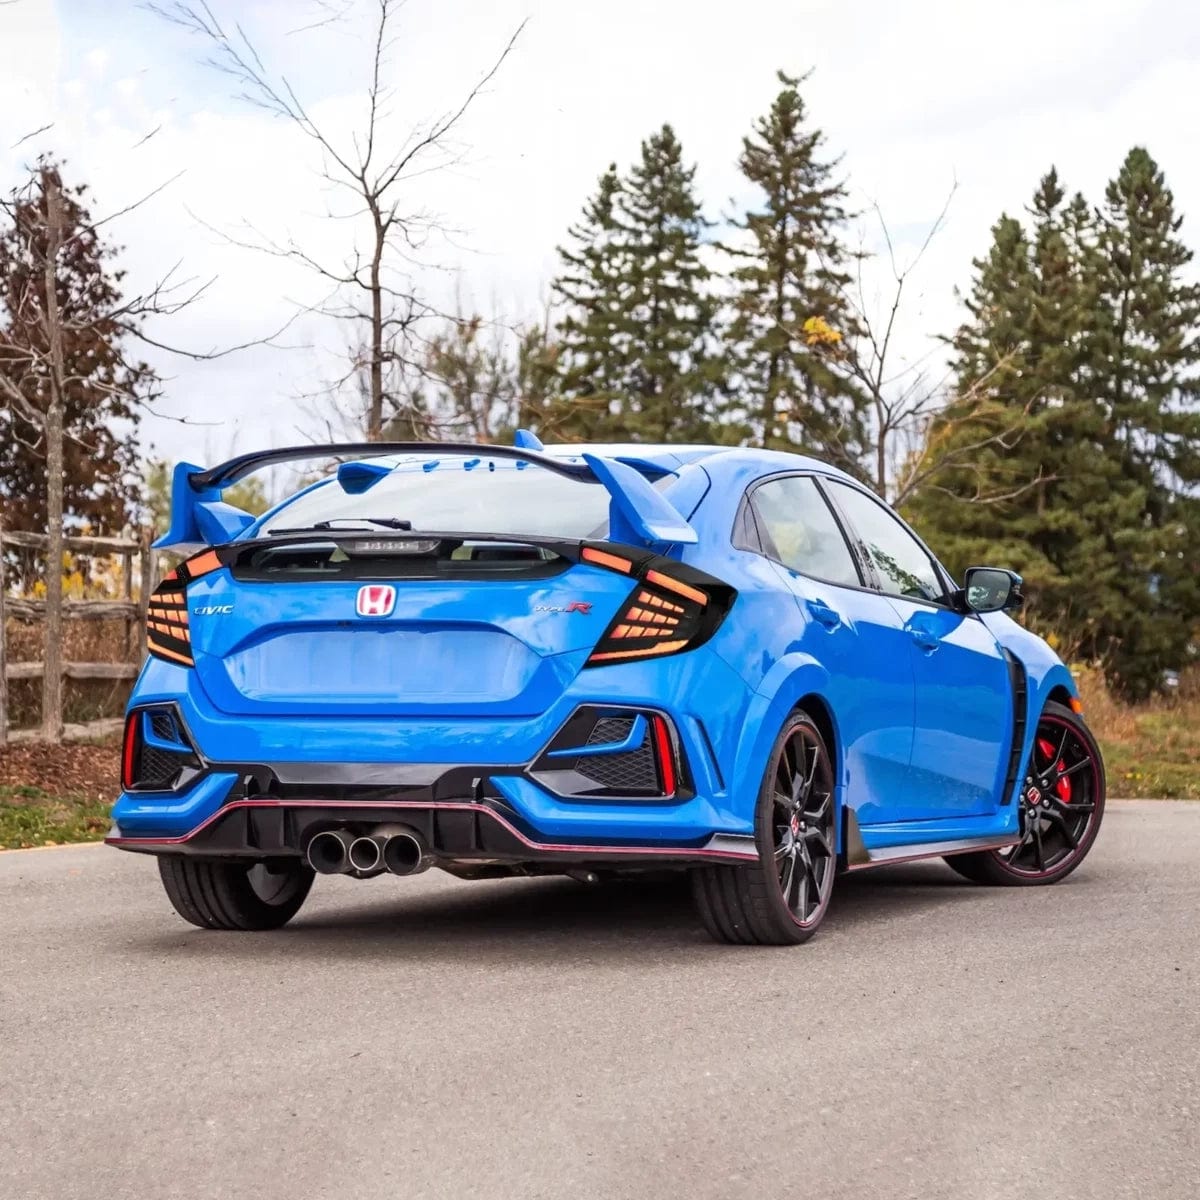 16-21 Honda Civic Hatchback Tail Lights with Dynamic Welcome Lighting - RGB Halo Kits Multicolor Flow Series Color Chasing RGBWA LED headlight kit Colorshift Oracle Lighting Trendz OneUpLighting Morimoto theretrofitsource AutoLEDTech Diode Dynamics